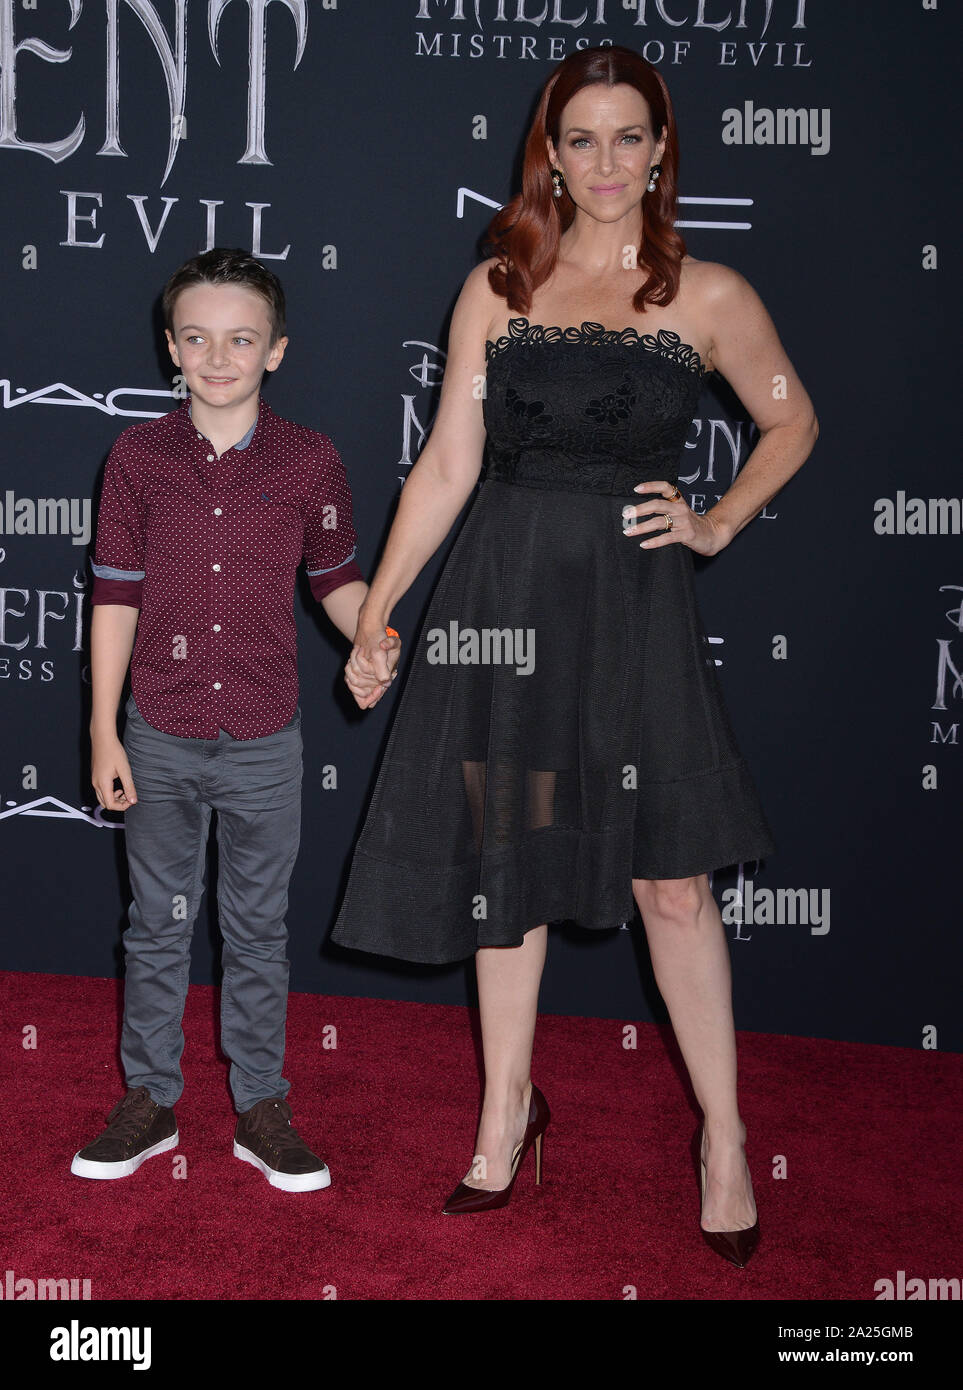 Los Angeles, USA. 30 Sept, 2019. Annie Wersching and Freddie Full attends the World Premiere of Disney's 'Maleficent: Mistress of Evil' at El Capitan Theatre on September 30, 2019 in Los Angeles, California Credit: Tsuni/USA/Alamy Live News Stock Photo